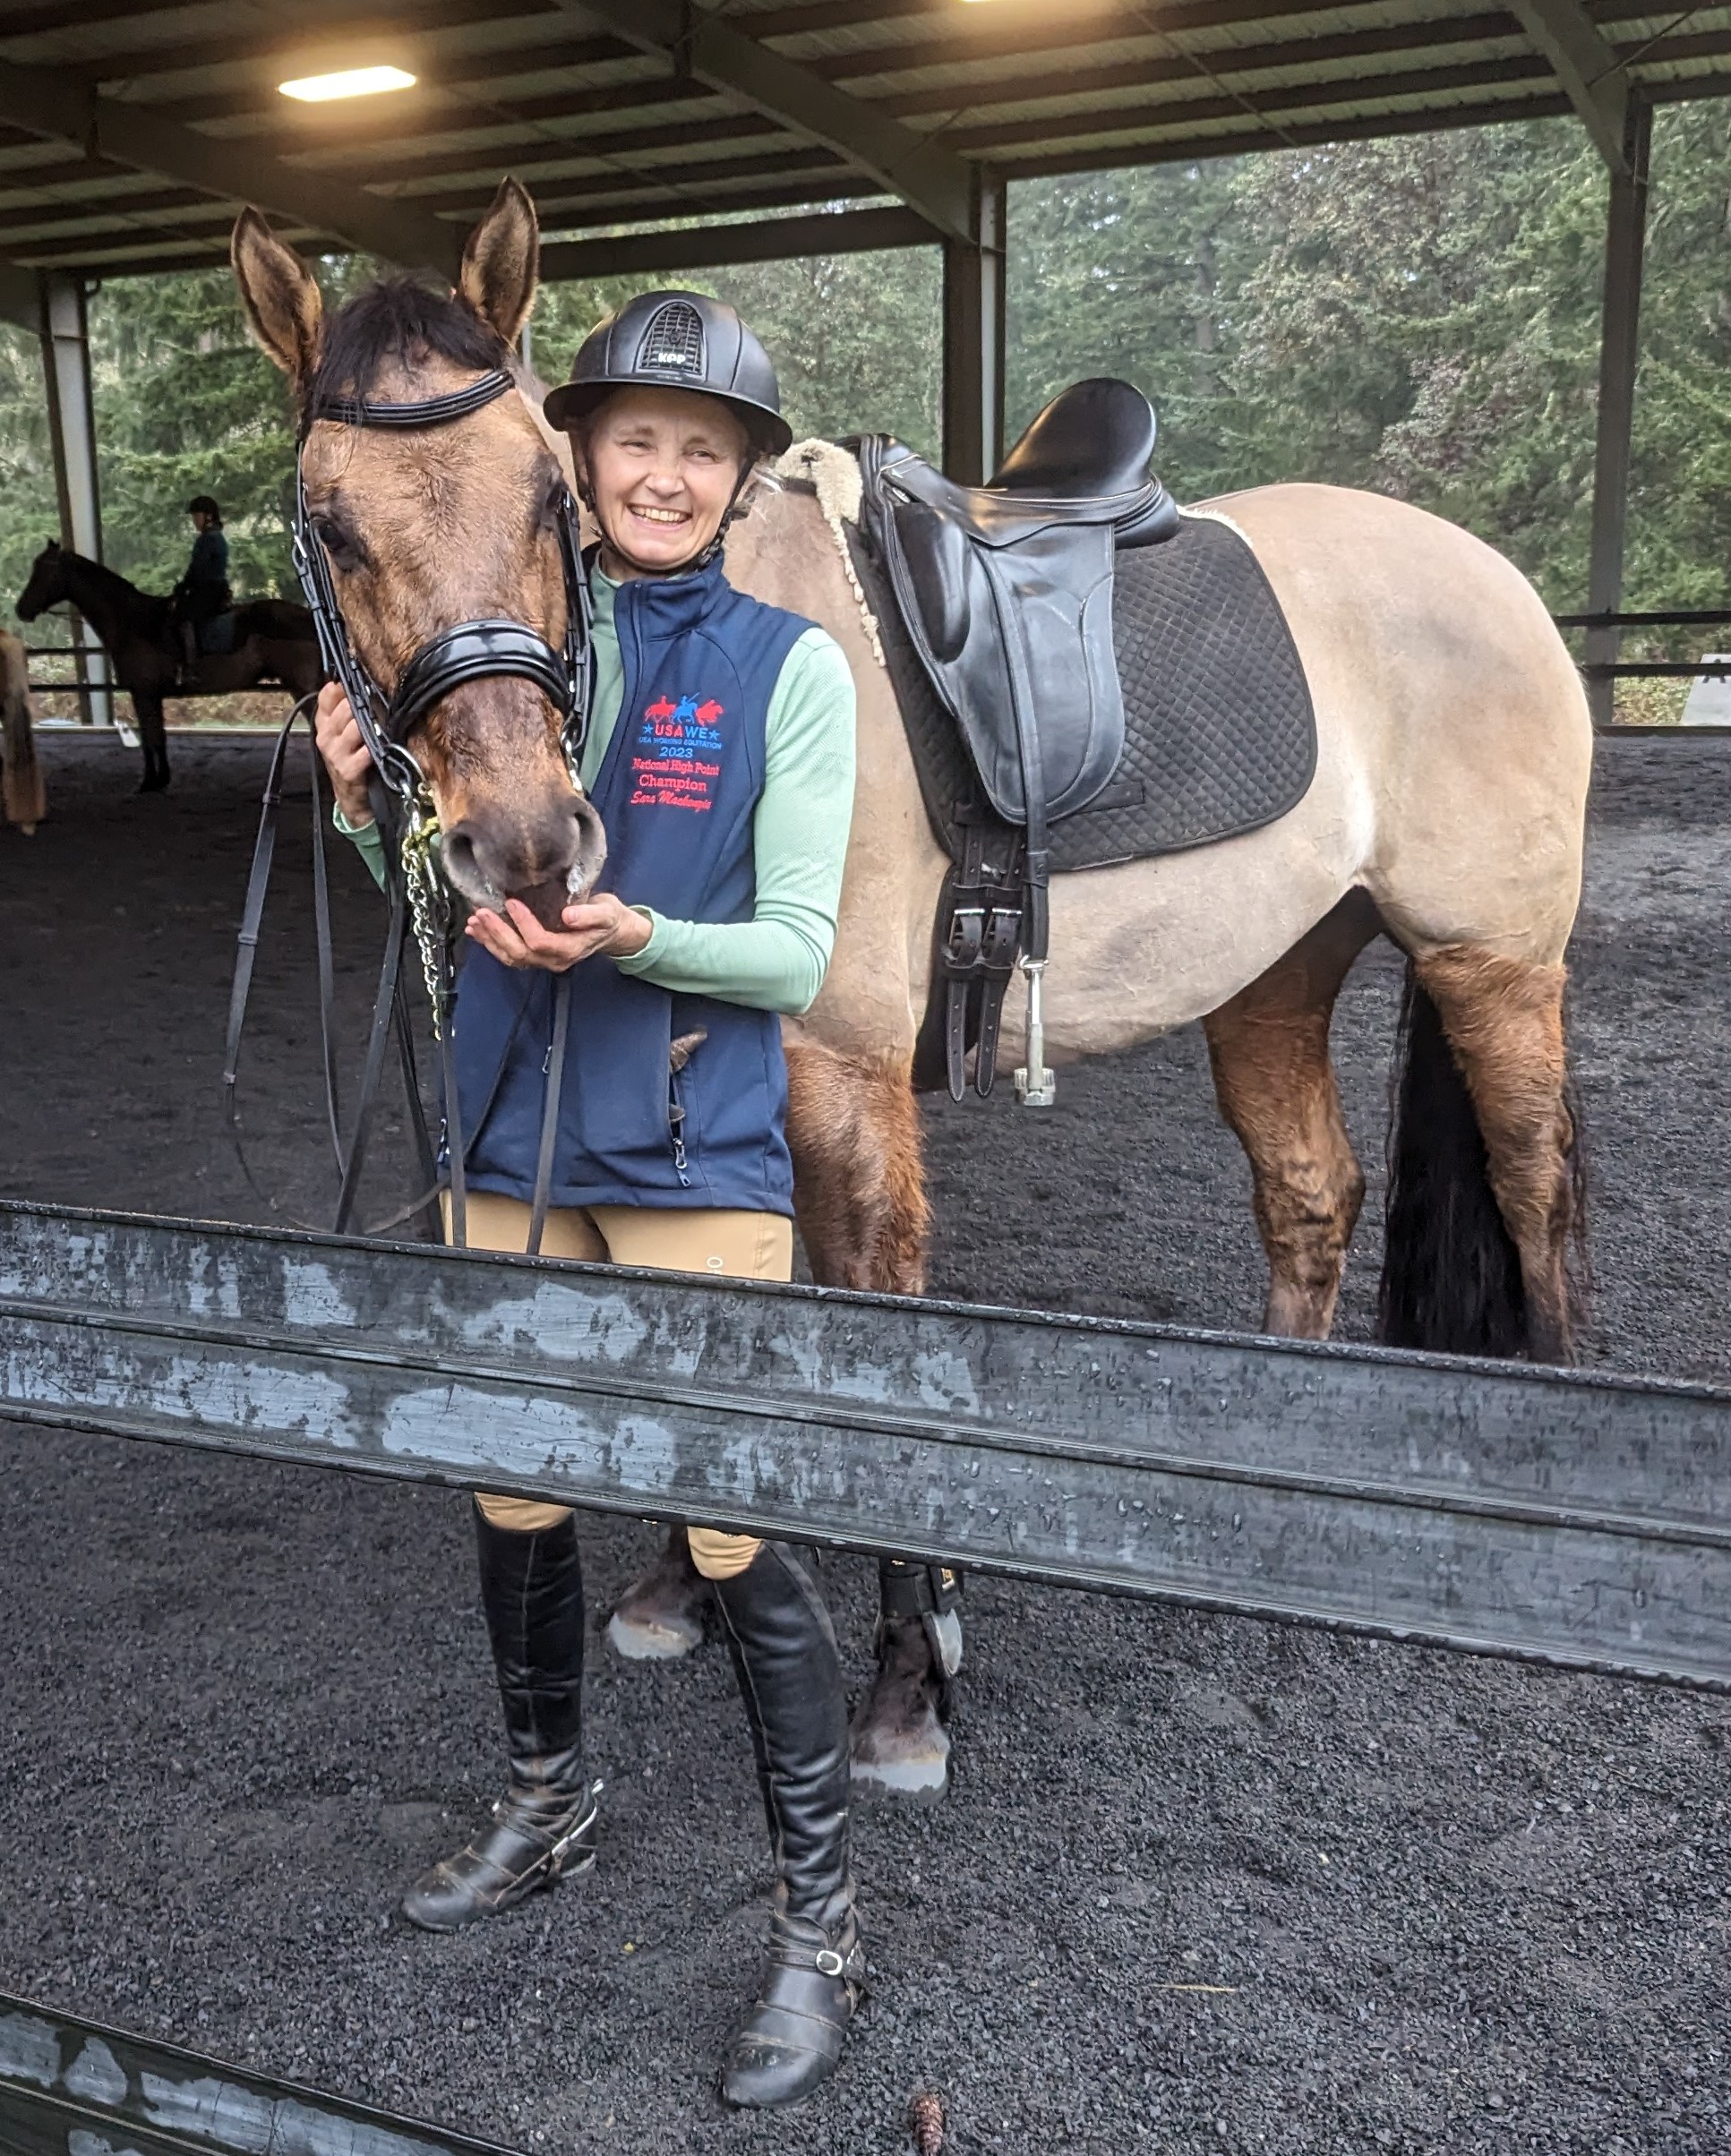 Sara Mackenzie took her horse, Golden Knight, on his first ferry ride to come to Vashon Island for the opportunity to be coached by Kimberlee Barker.